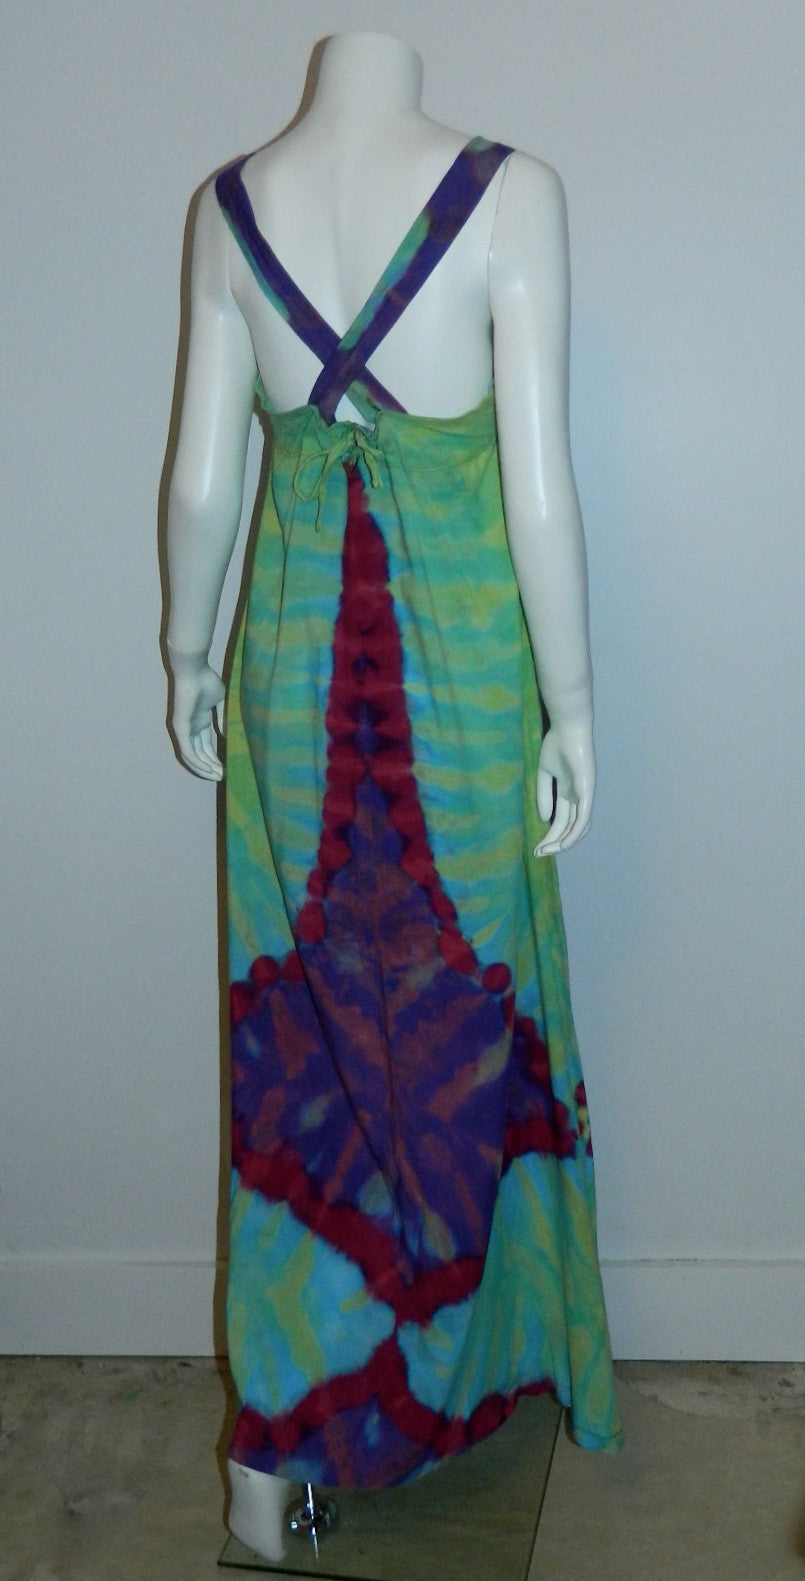 vintage 1970s TIE DYE rayon maxi dress / apron dress / overall strap gown XS - S